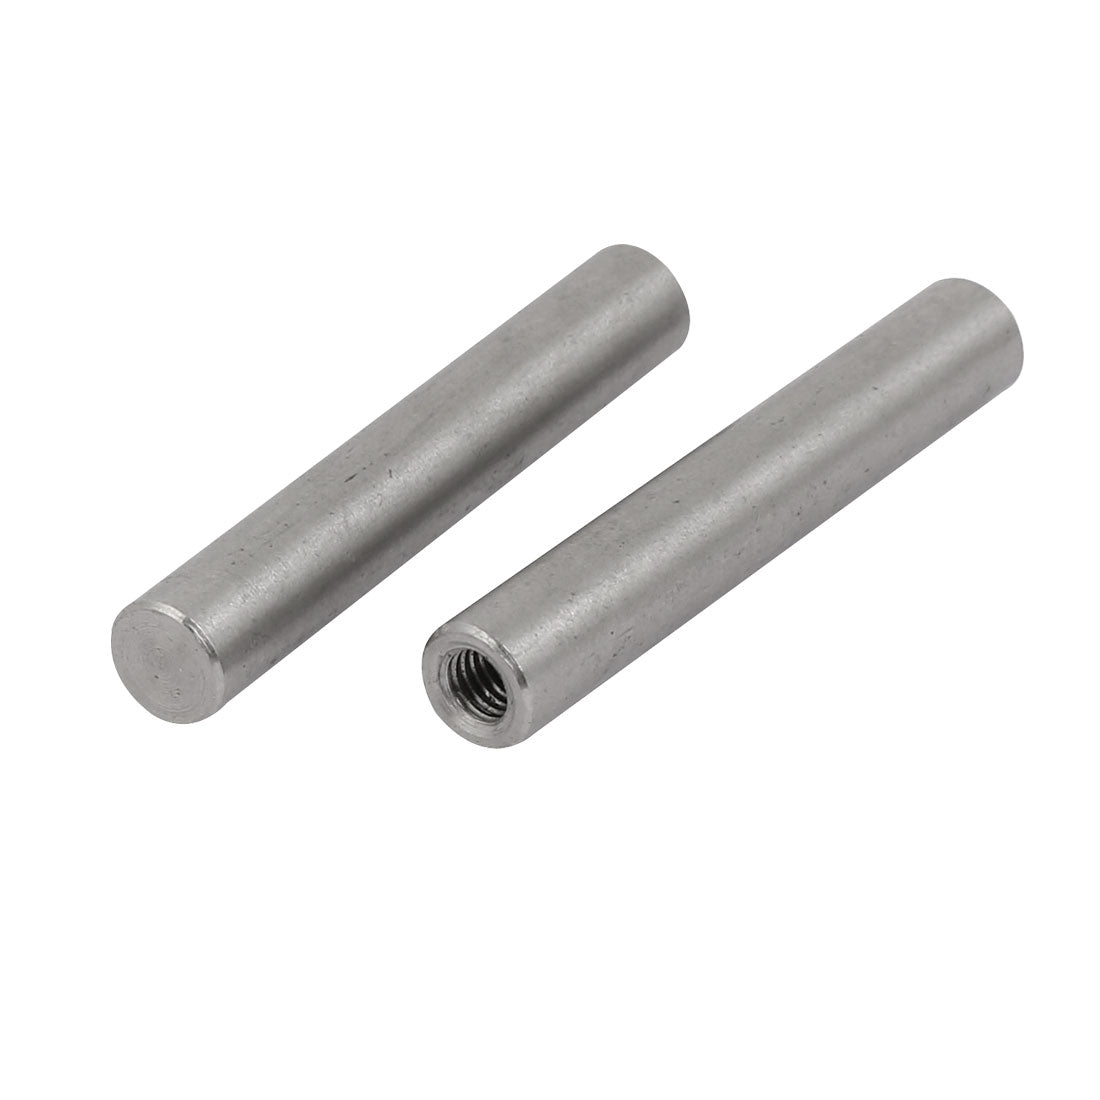 uxcell Uxcell 304 Stainless Steel M5 Female Thread 8mm x 50mm Cylindrical Dowel Pin 2pcs